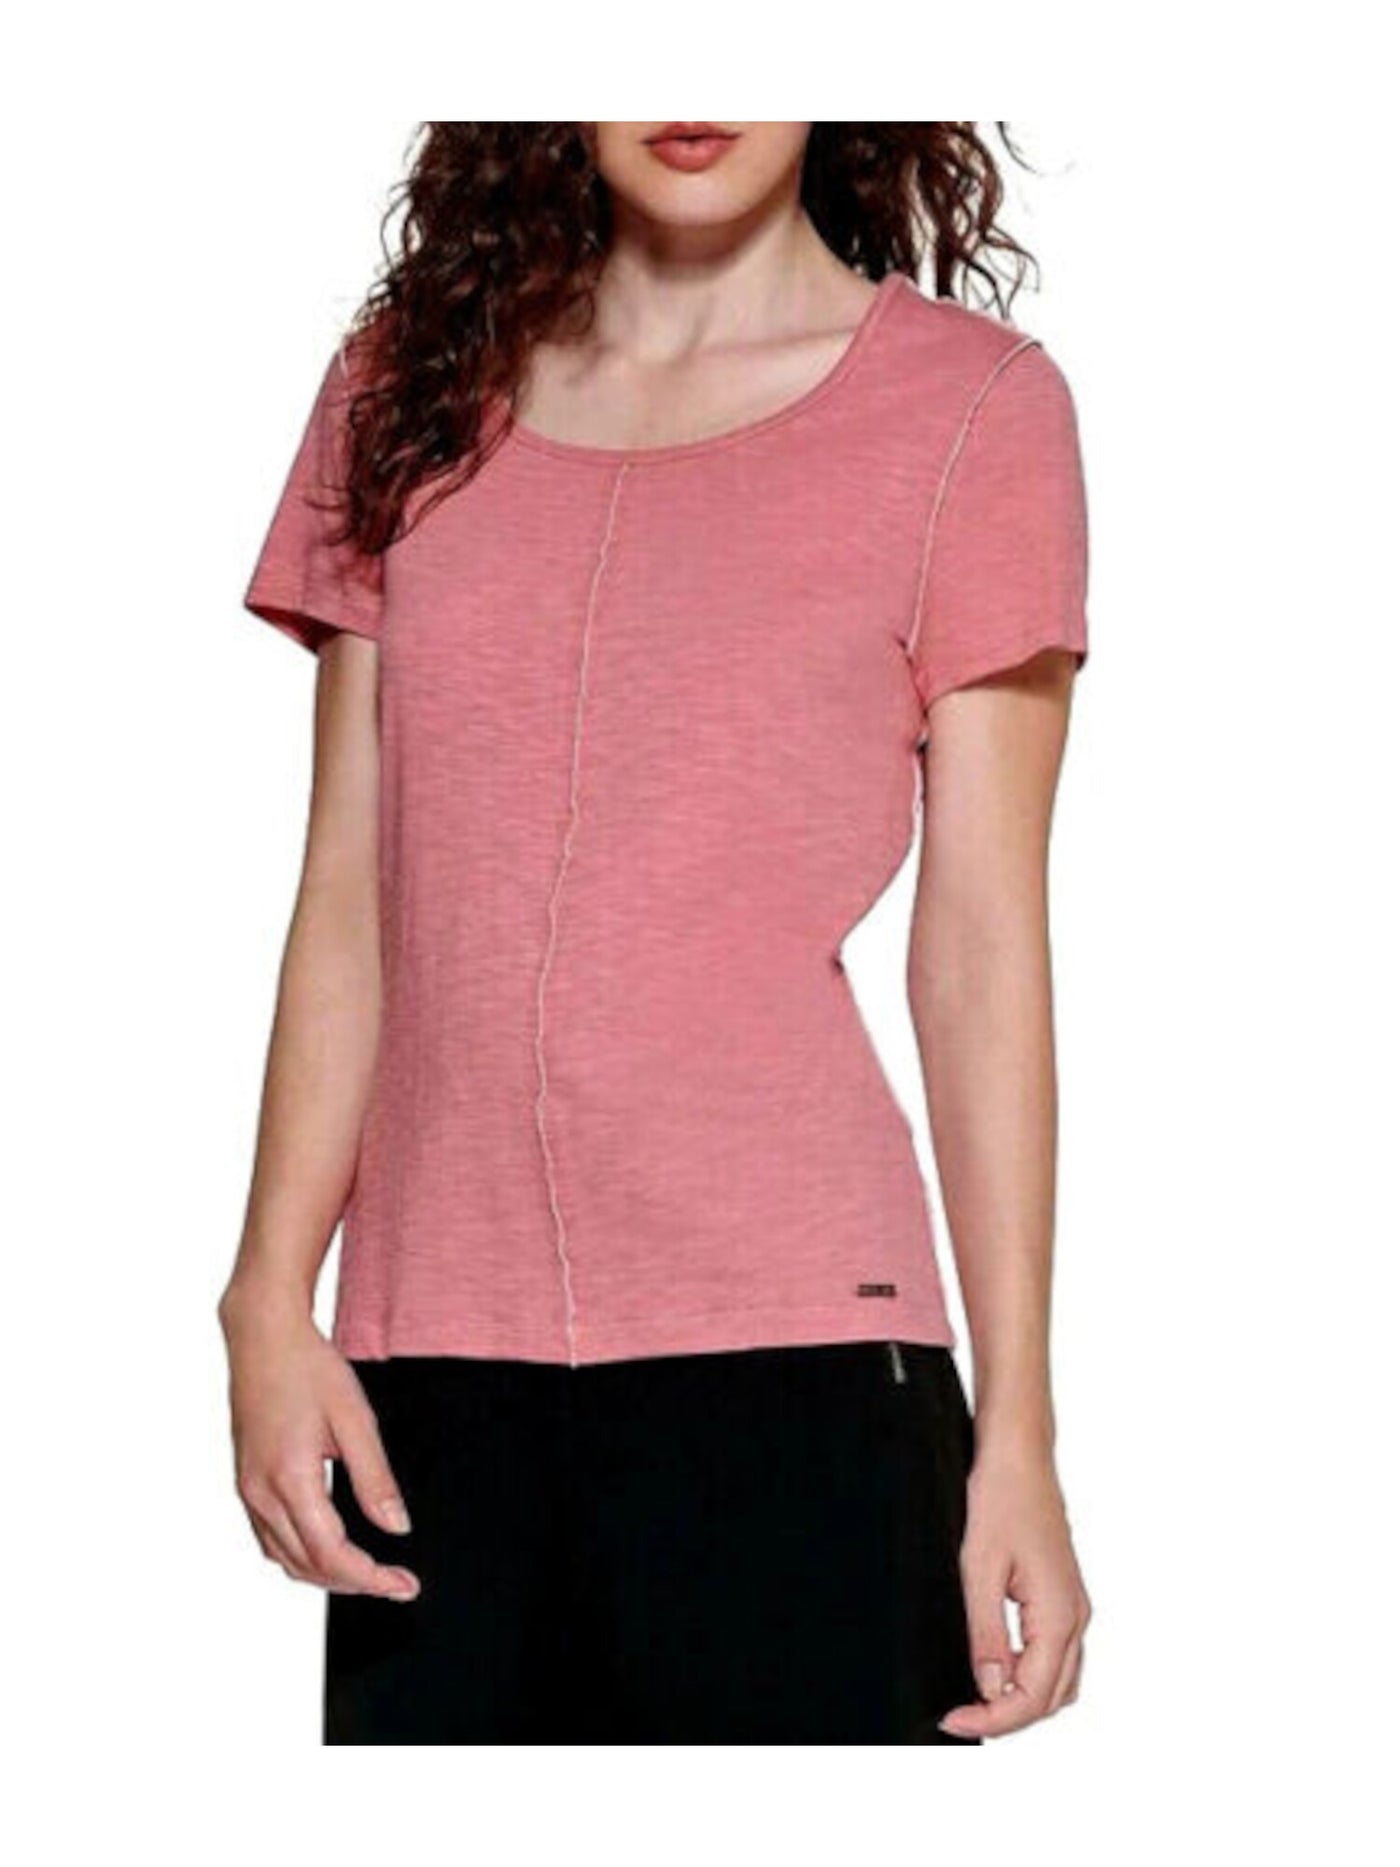 DKNY Womens Pink Textured Contrast Seams Short Sleeve Scoop Neck T-Shirt S